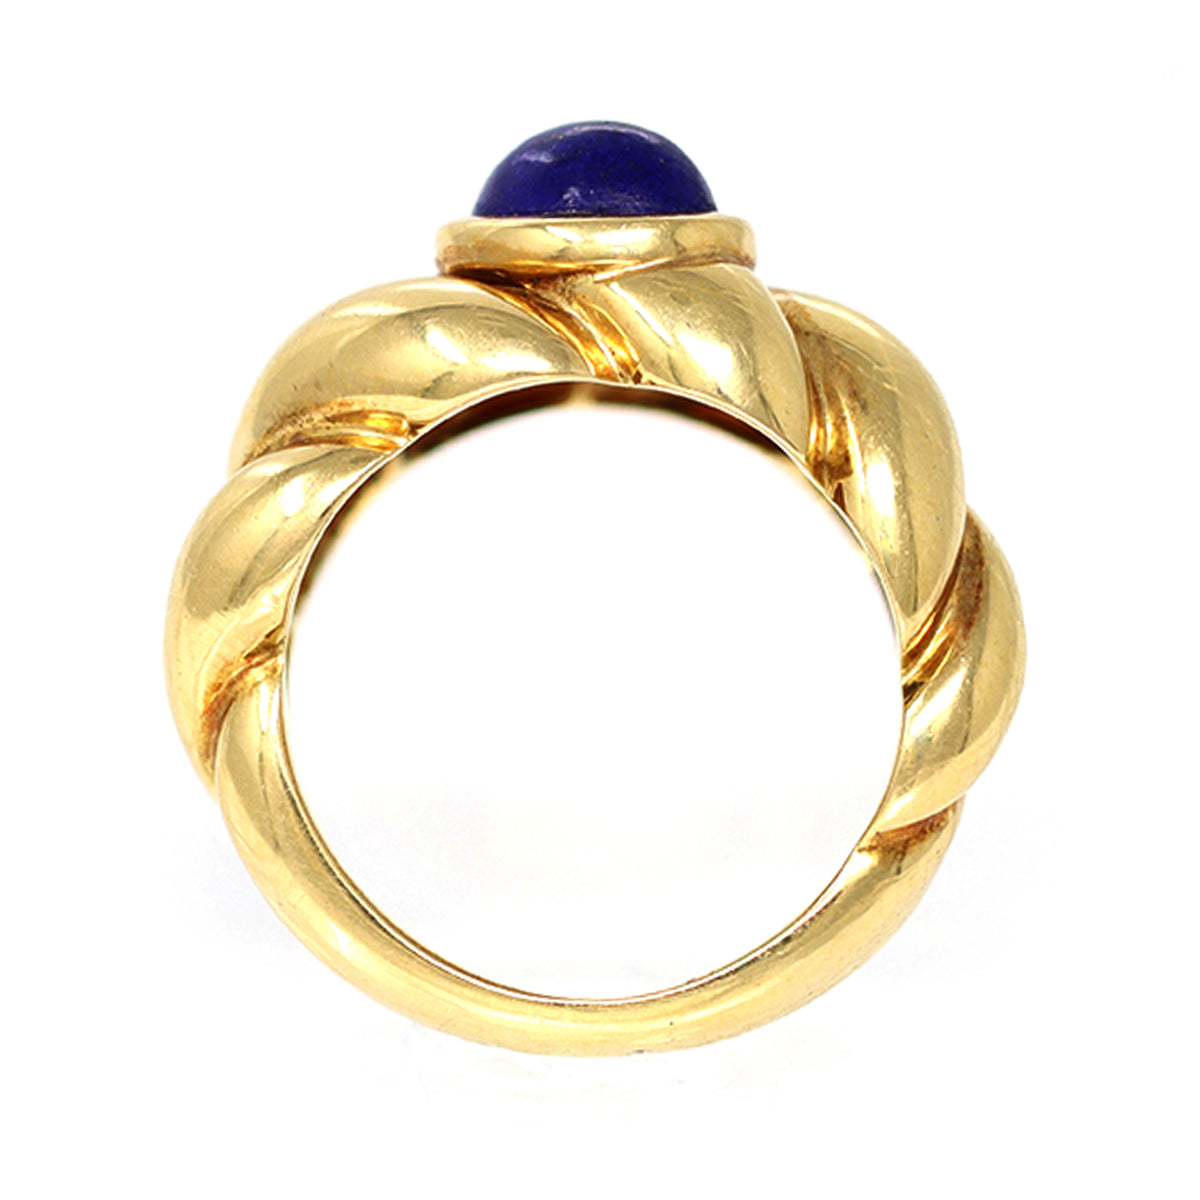 Van Cleef &amp; Arpels Lapis Lazuli Cabochon Ring Set in 18k Yellow Gold front view